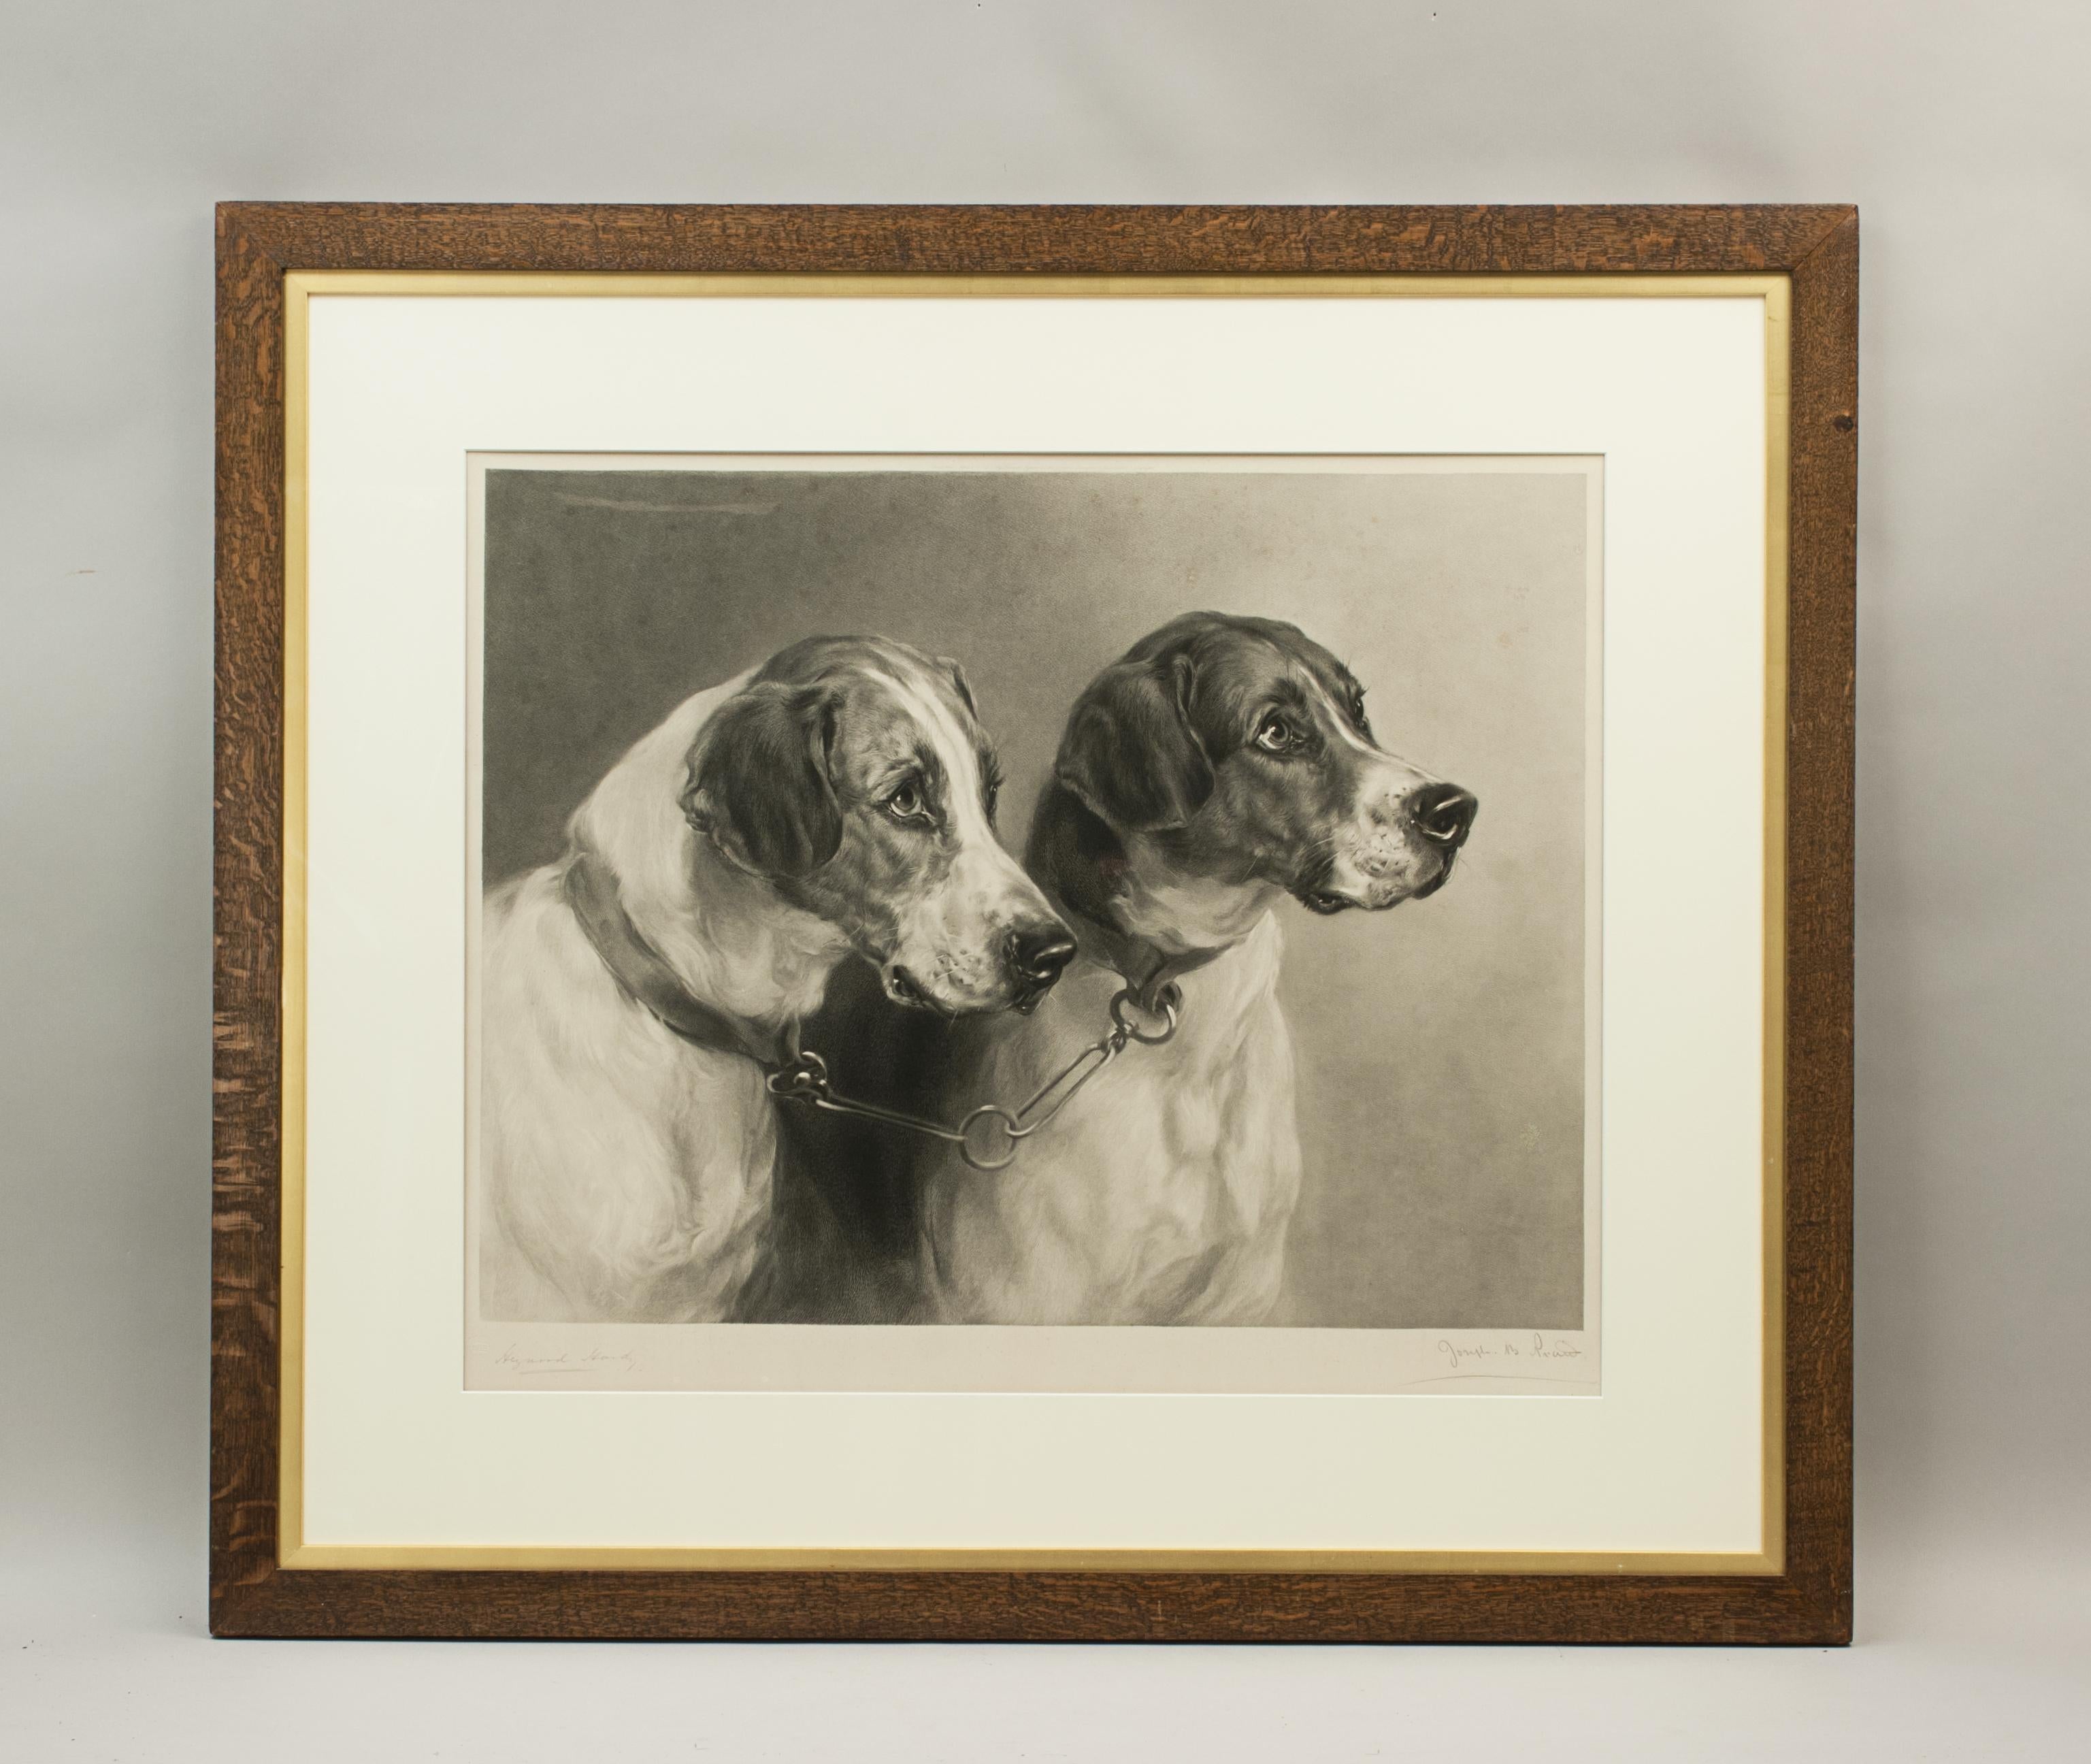 Pick of the Pack, Stormer and Grasper.
Antique hunting mixed-method engraving of a pair of hounds after the original art work by Heywood Hardy. An artist's proof engraved by Joseph Bishop Pratt (1854-1910) and published by Thomas Agnew & Sons. This